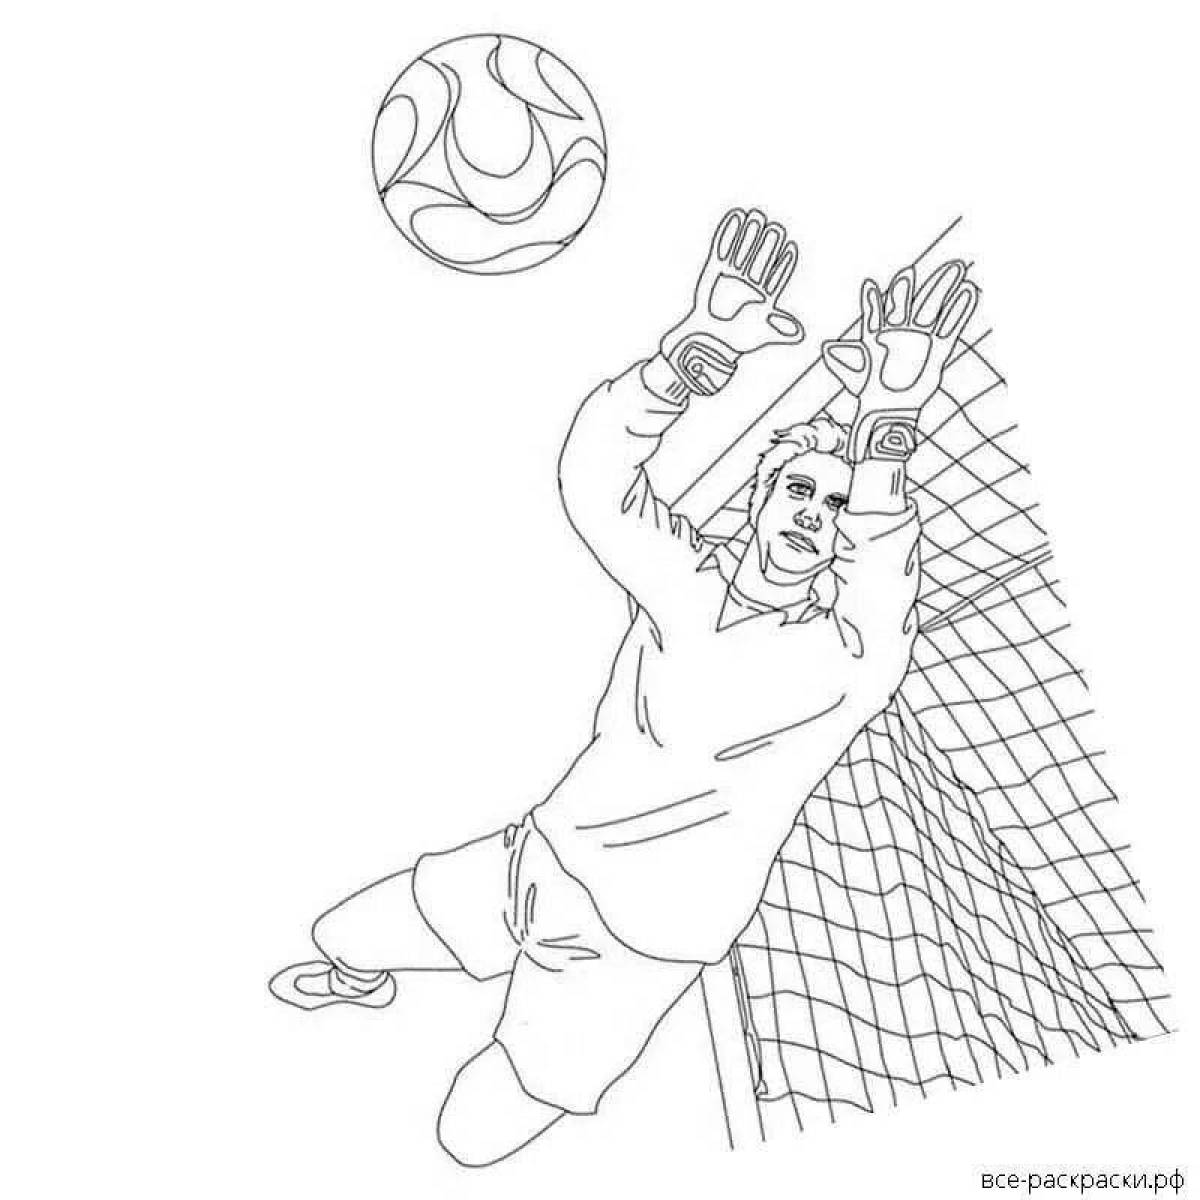 Witty football goalkeeper coloring page